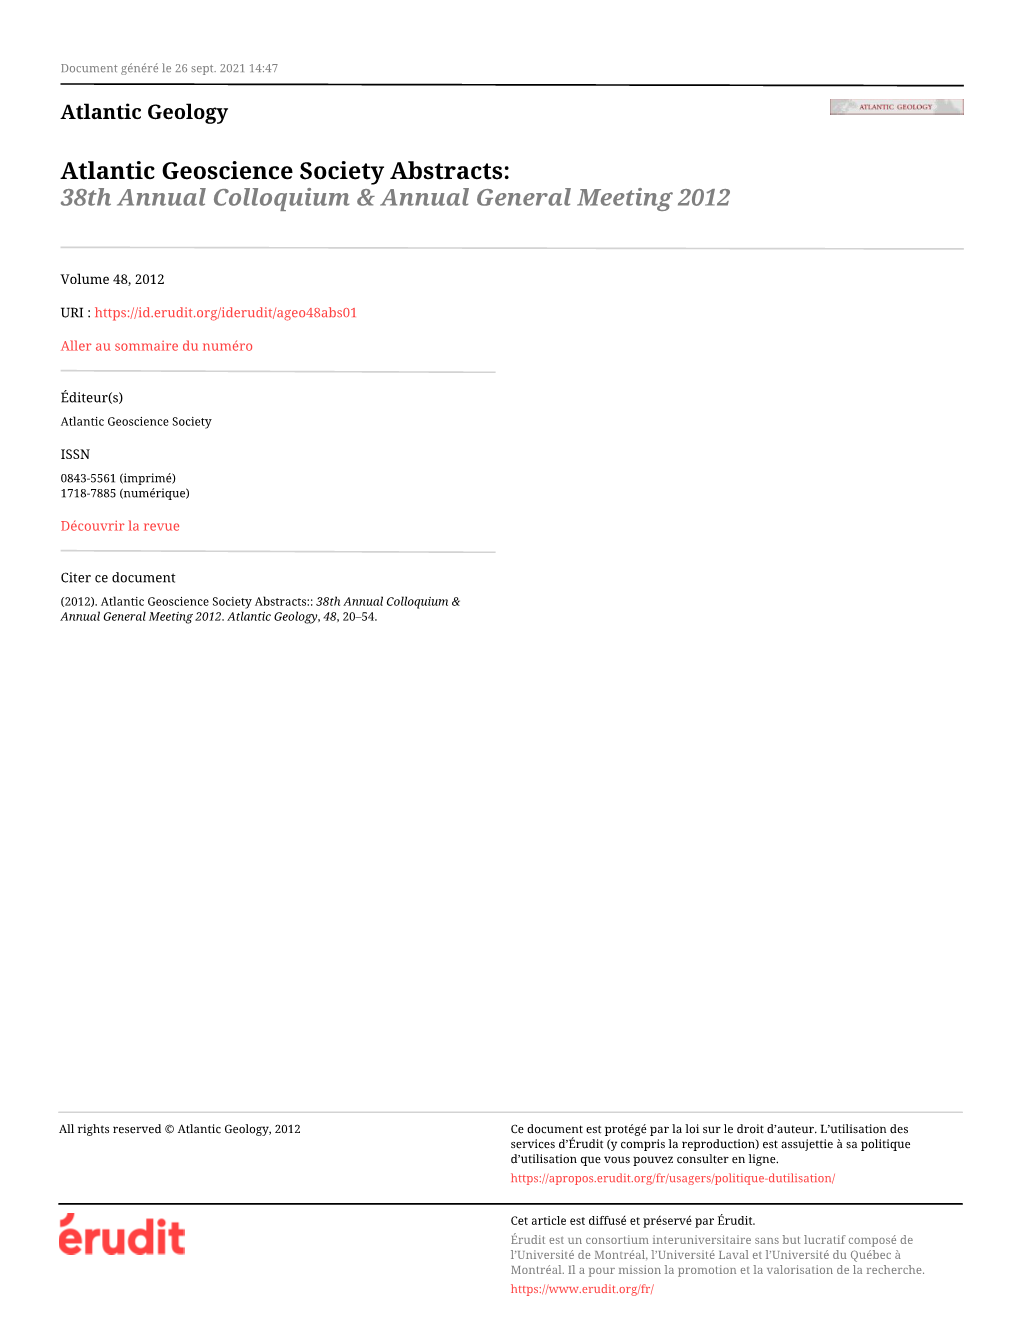 Atlantic Geoscience Society Abstracts:: 38Th Annual Colloquium & Annual General Meeting 2012